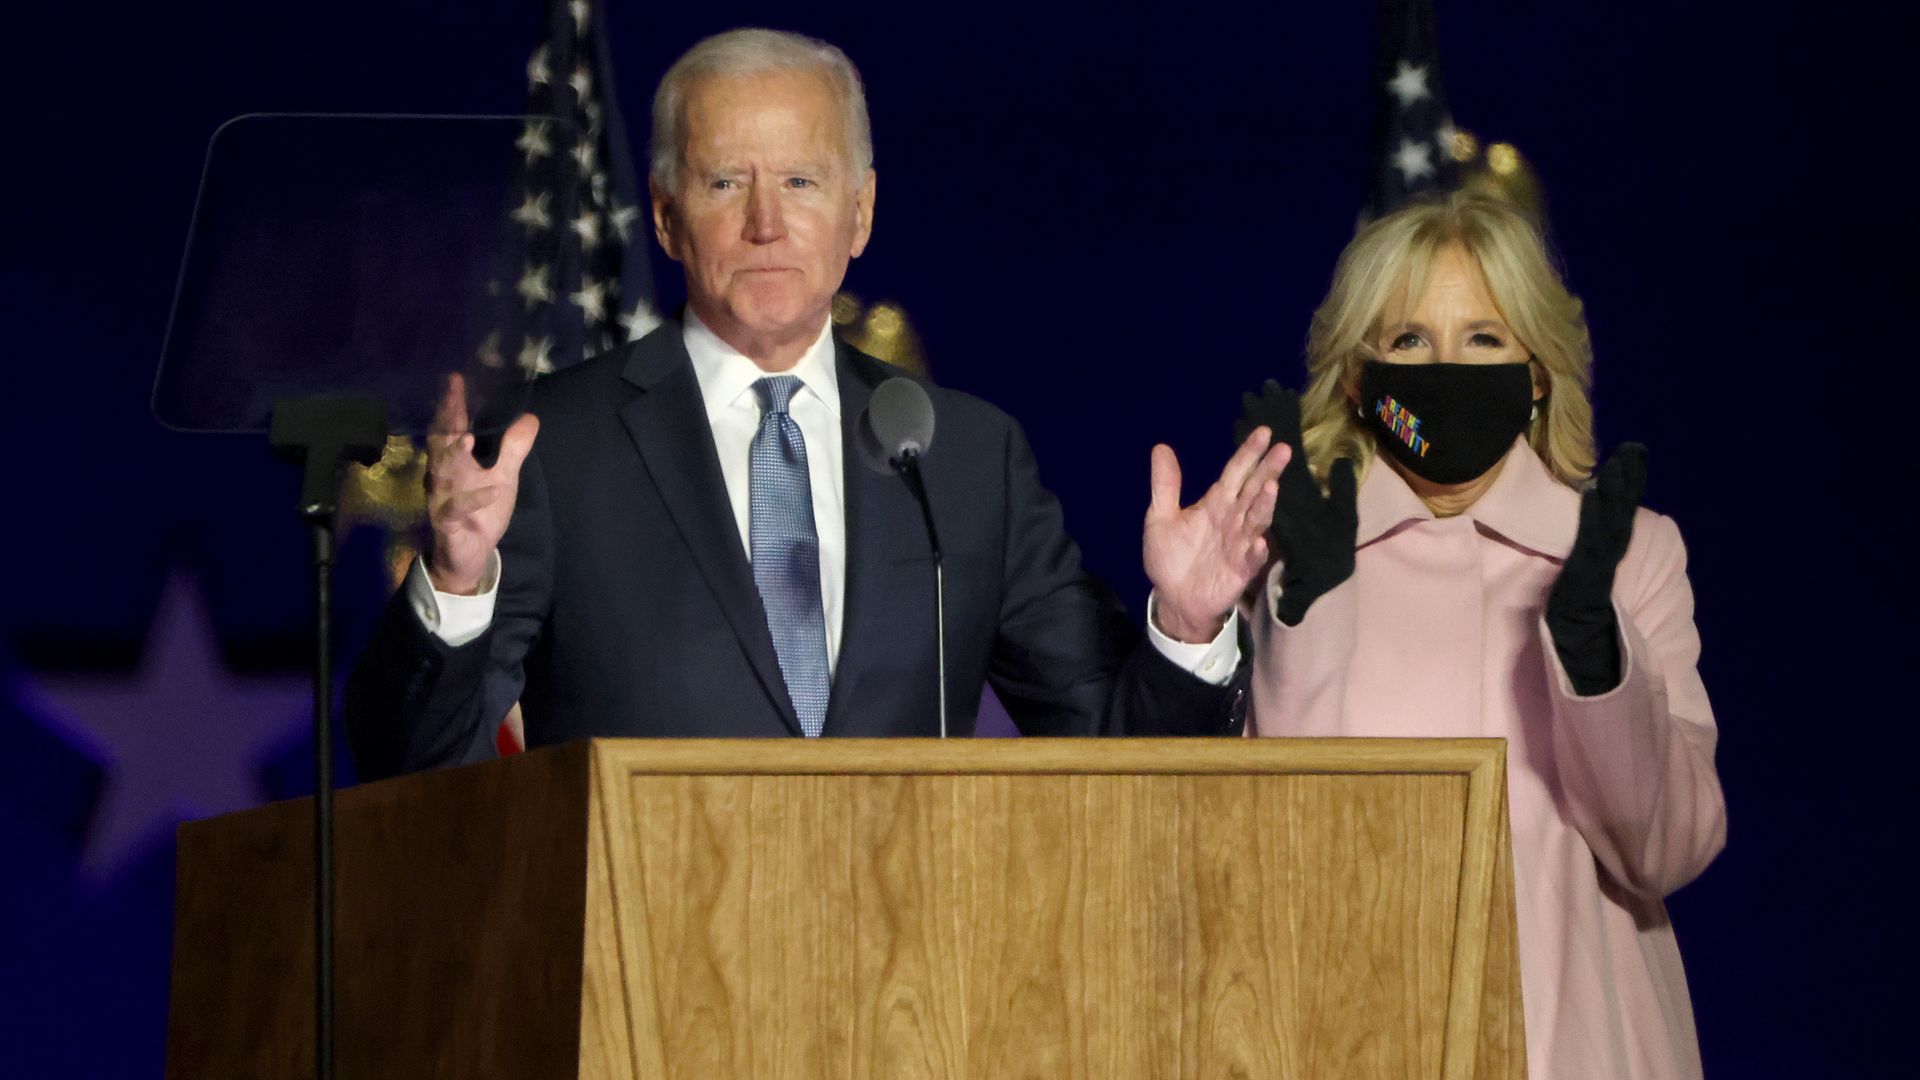 Picture of Joe Biden and his wife, Dr. Jill Biden, in front of a podium.